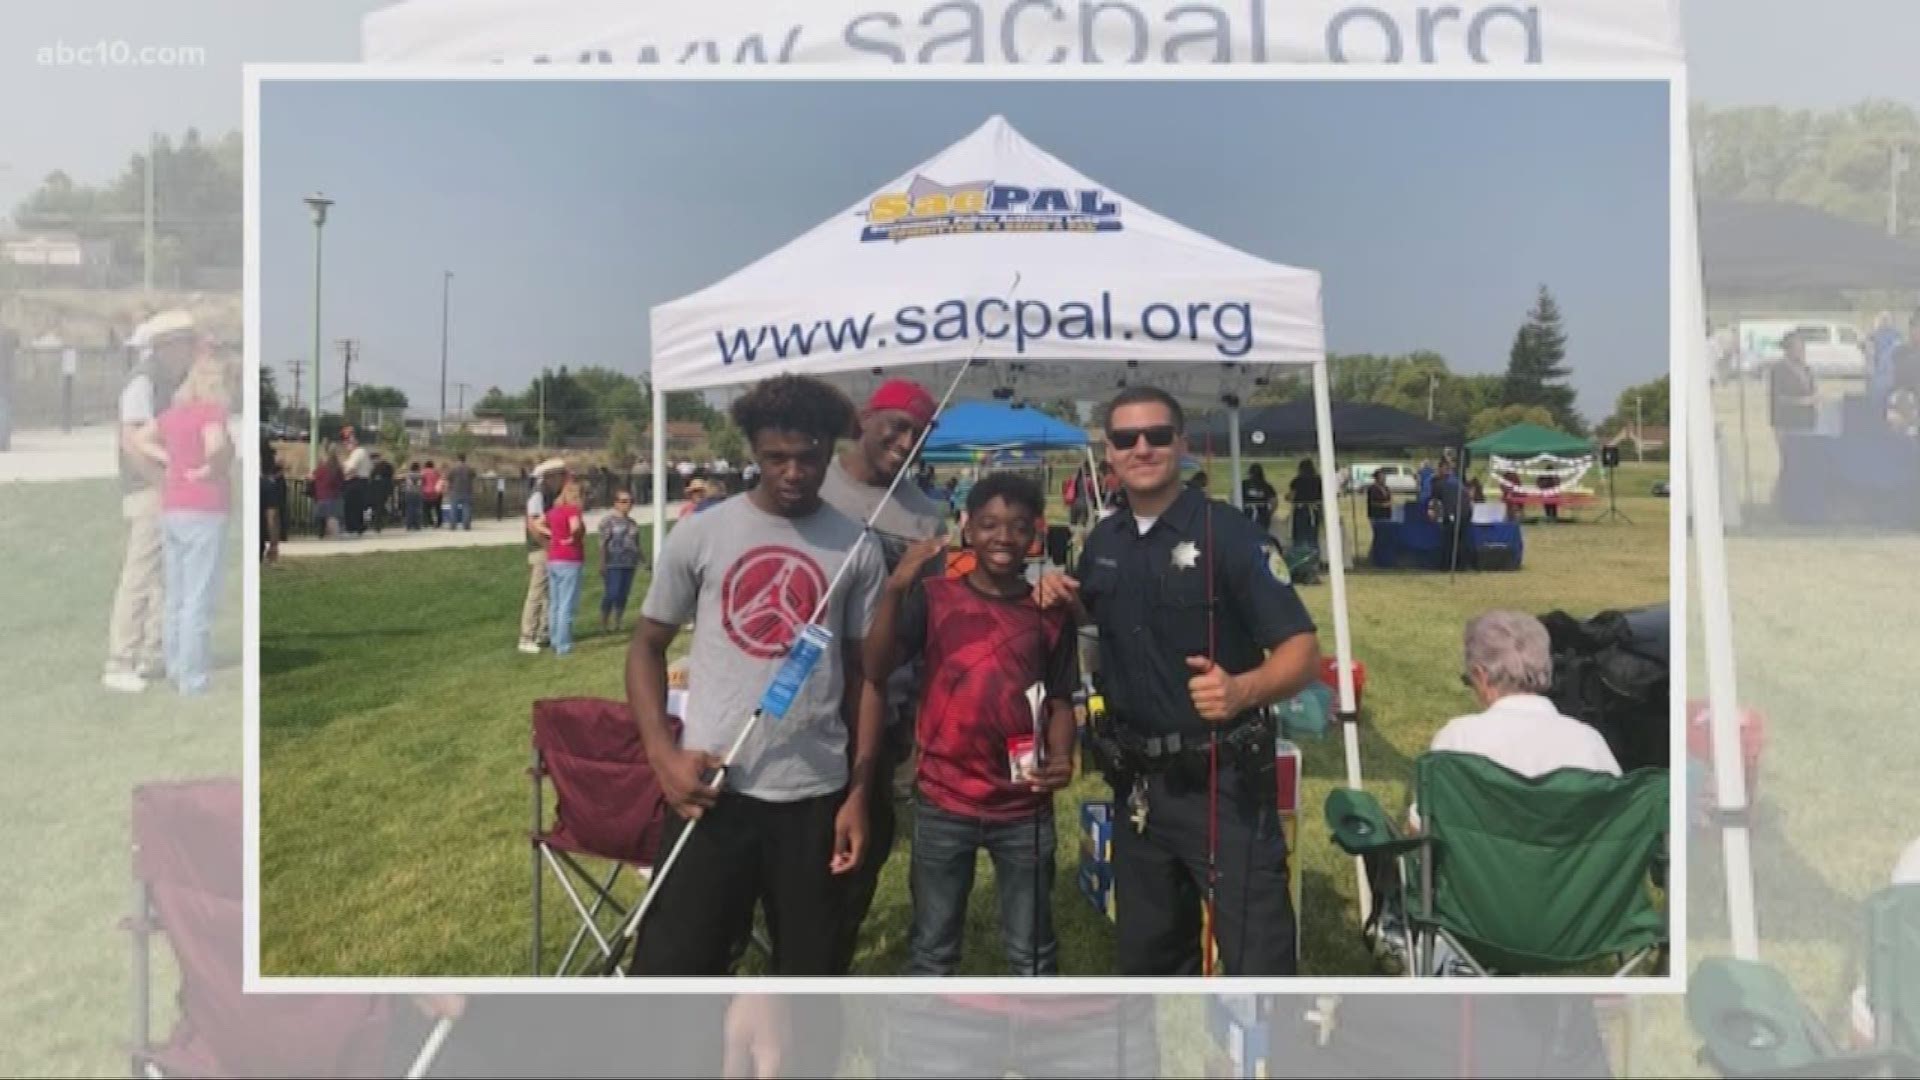 School is back in session for many area students, and for the latest "What's Working" segment, we wanted to highlight what Sacramento Police are doing to make sure kids have a safe and enjoyable school year.